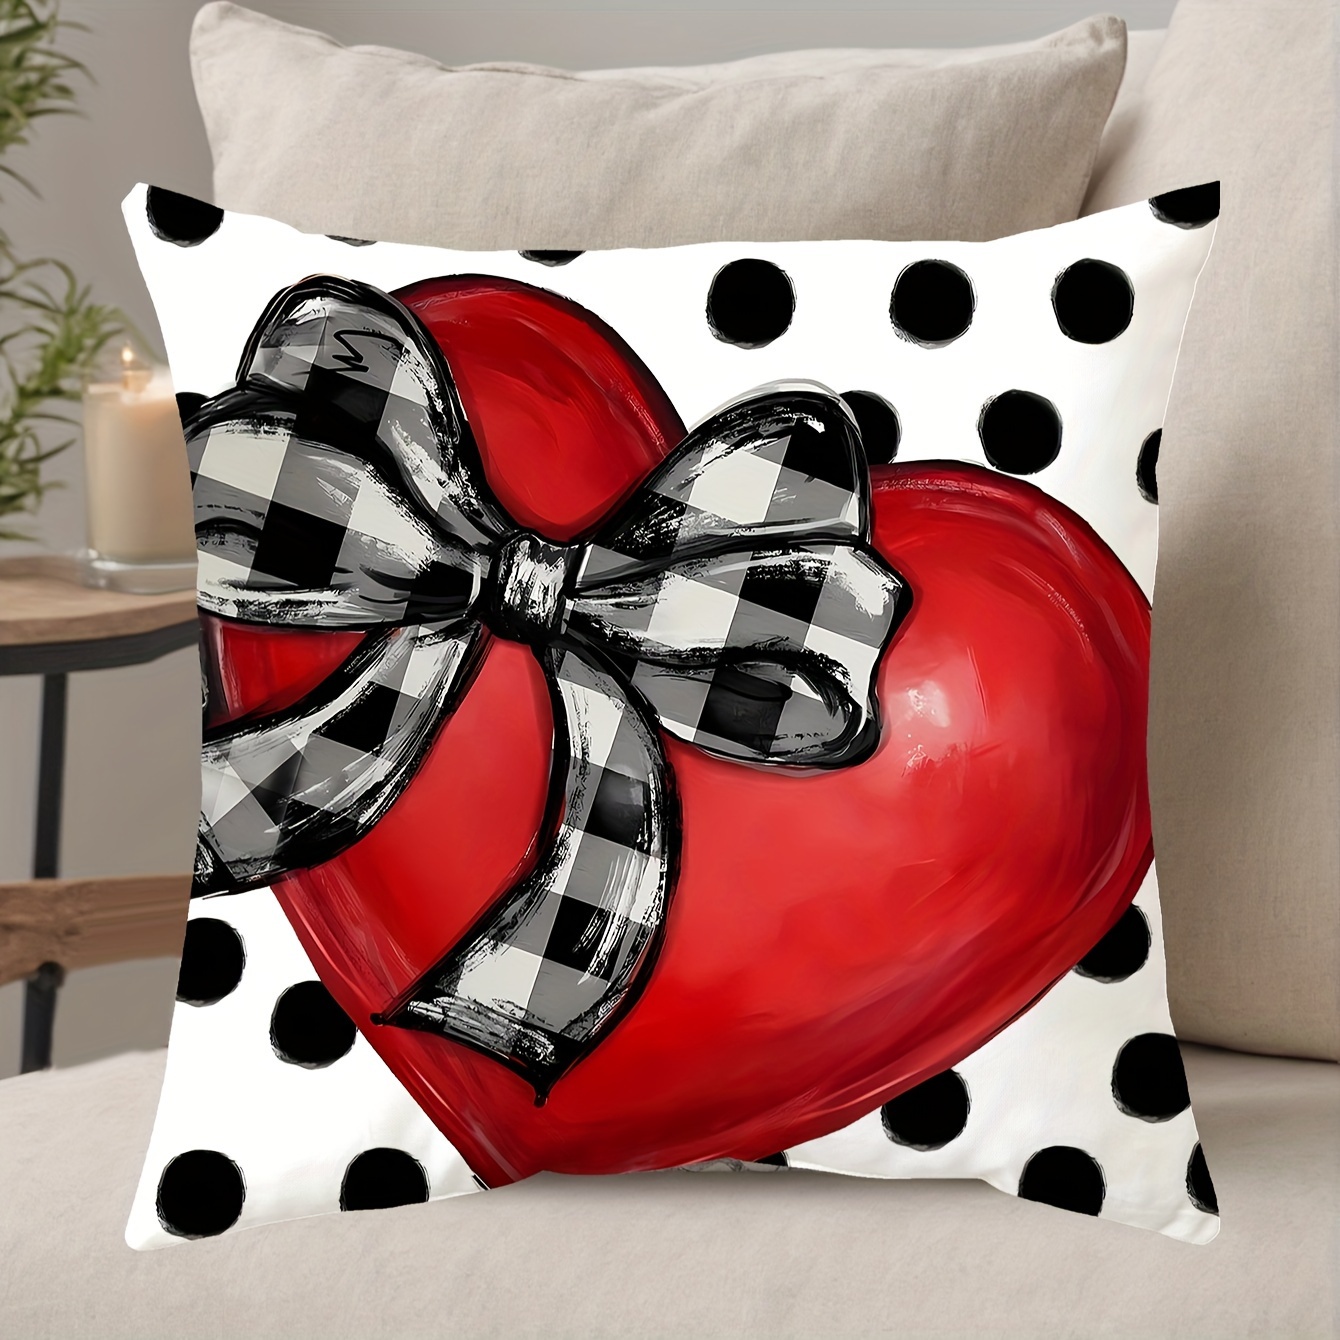 

2pcs, Contemporary Style Printed Burlap Heart Shaped Pillow Covers With Bow Tie Design, Black And White Polka Dots, 18x18 Inches, Decorative Cushion Cases For Home Decor